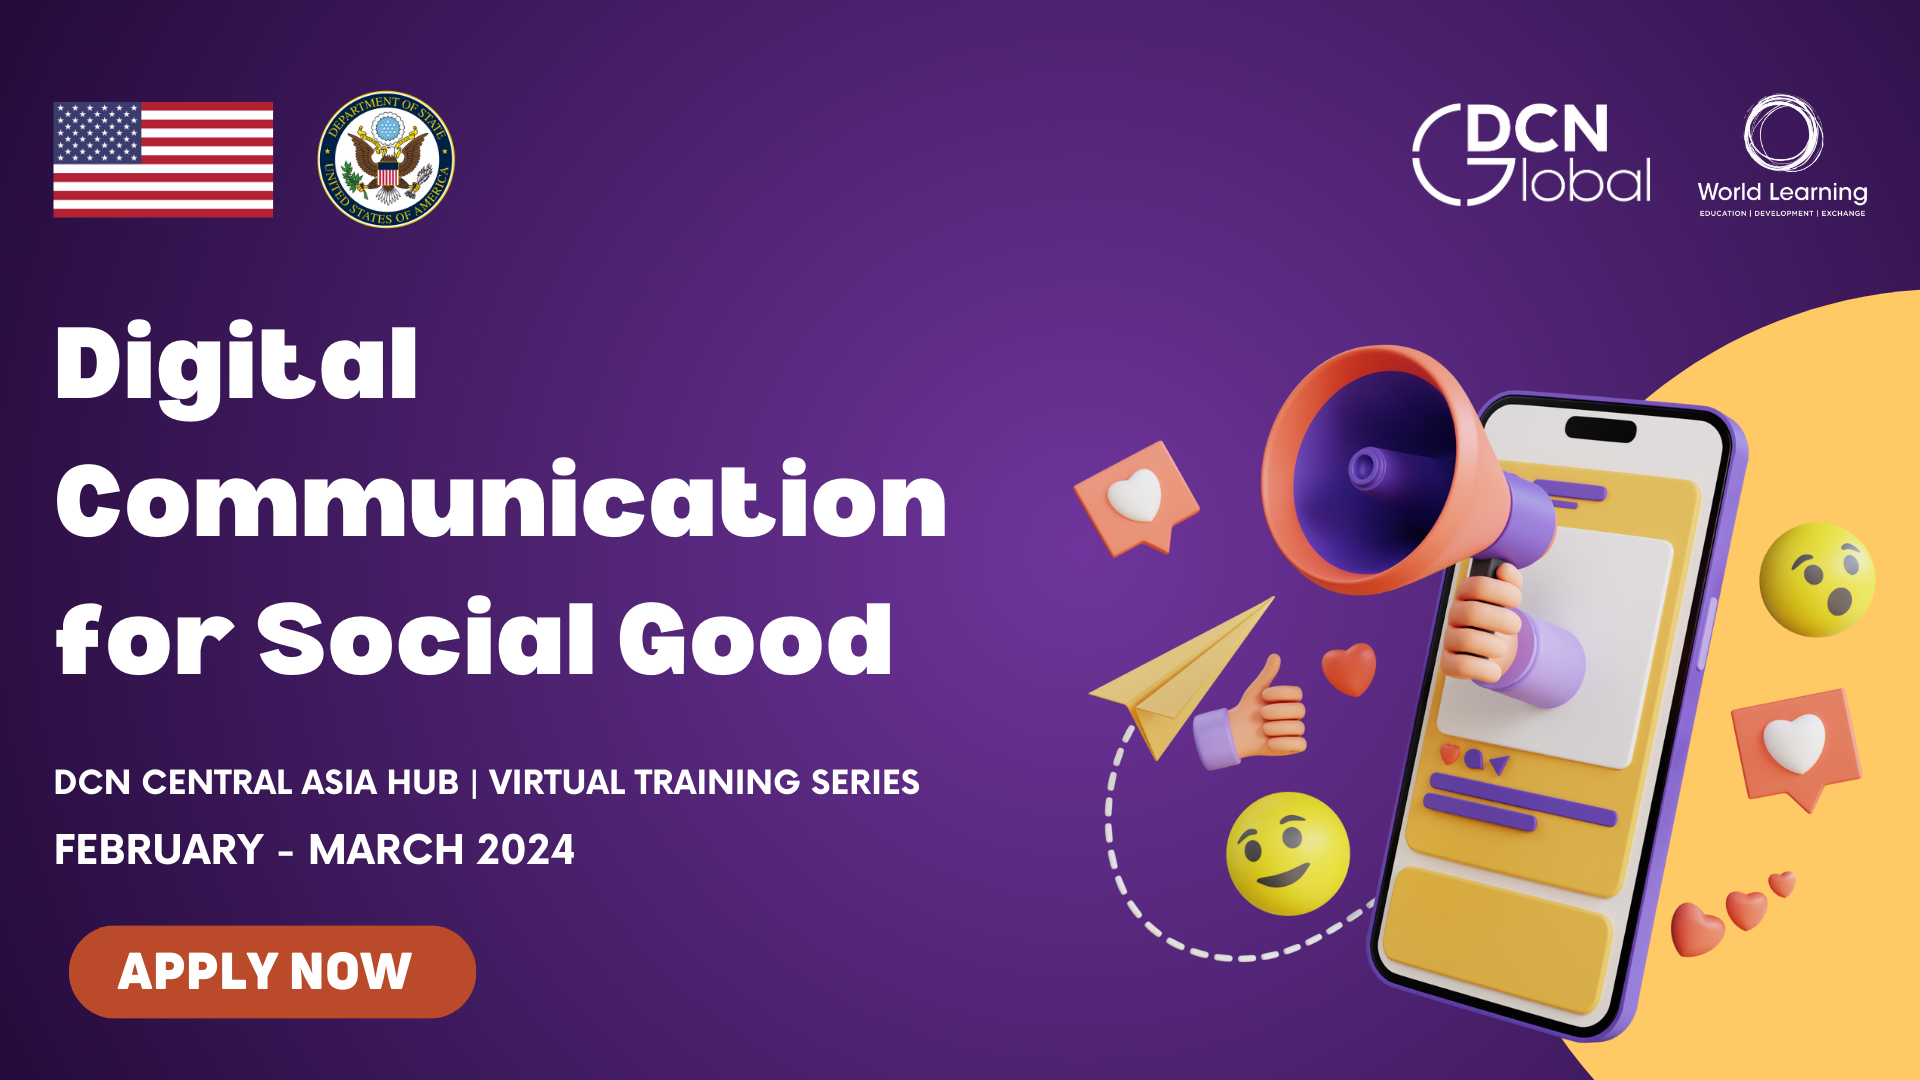 February: "Digital Communication for Social Good" | Virtual Training Series for Central Asia